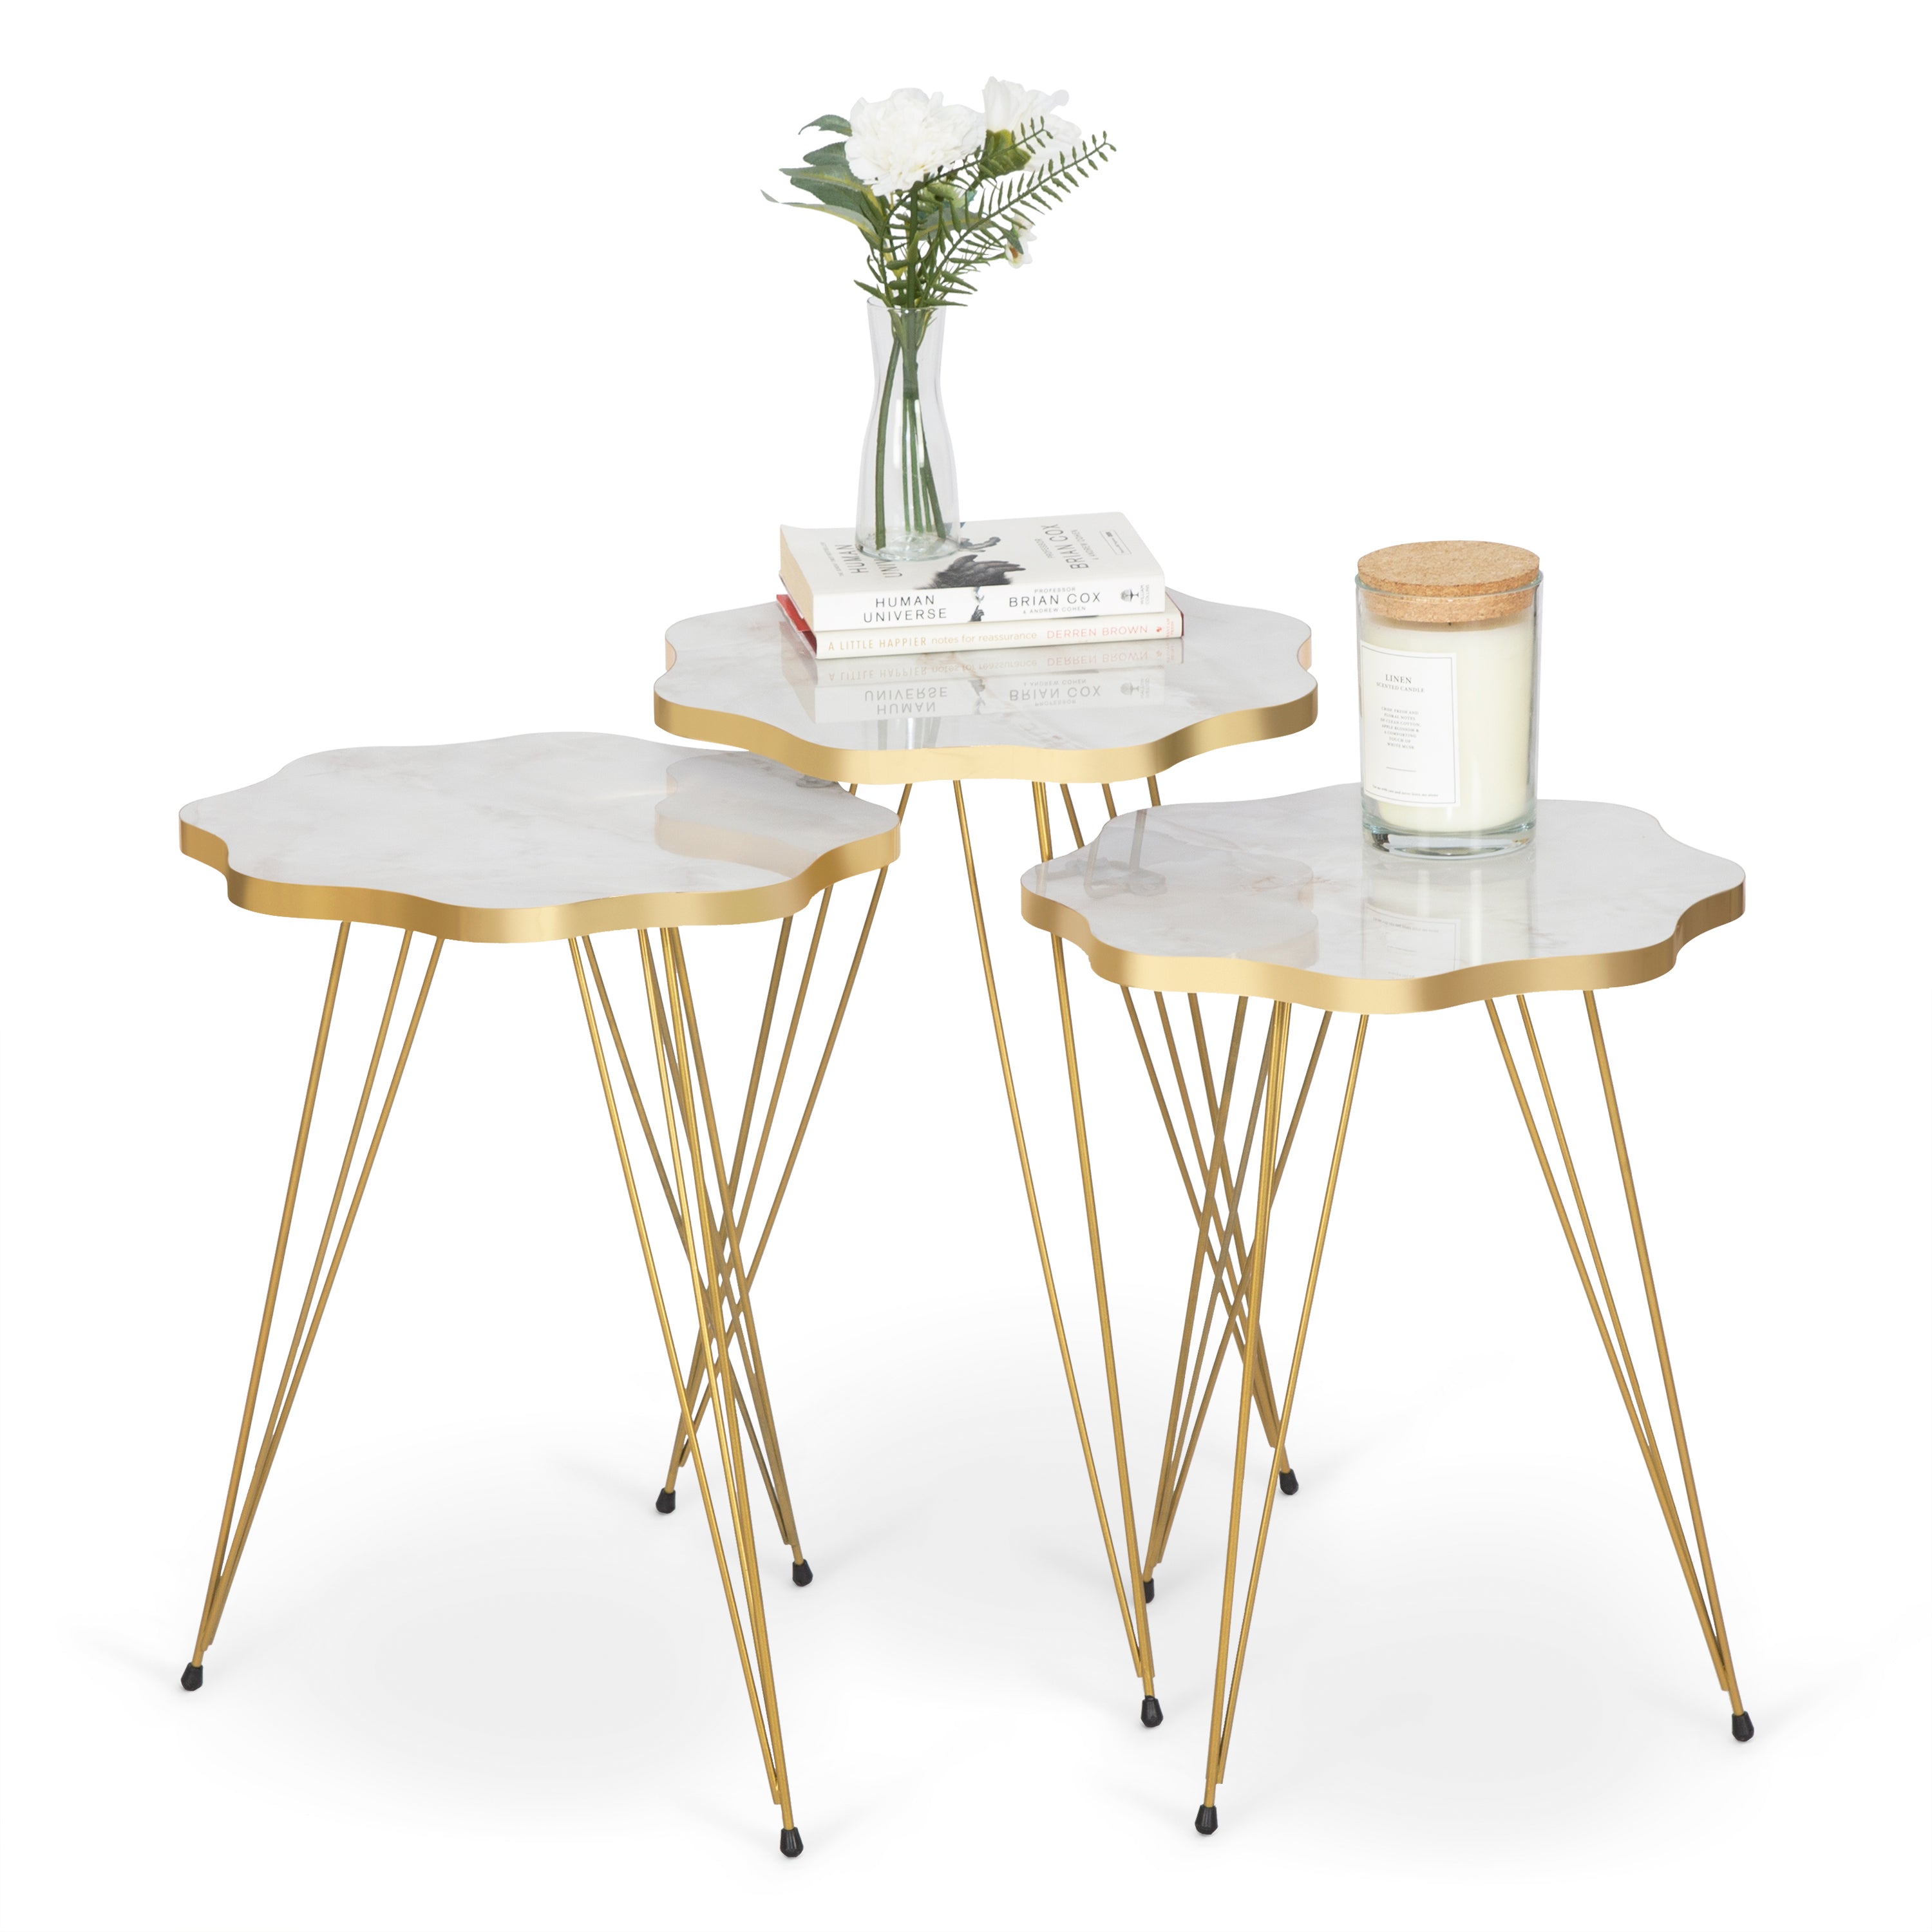 Daisy Set Of 3 Side Tables - White Marble & Gold